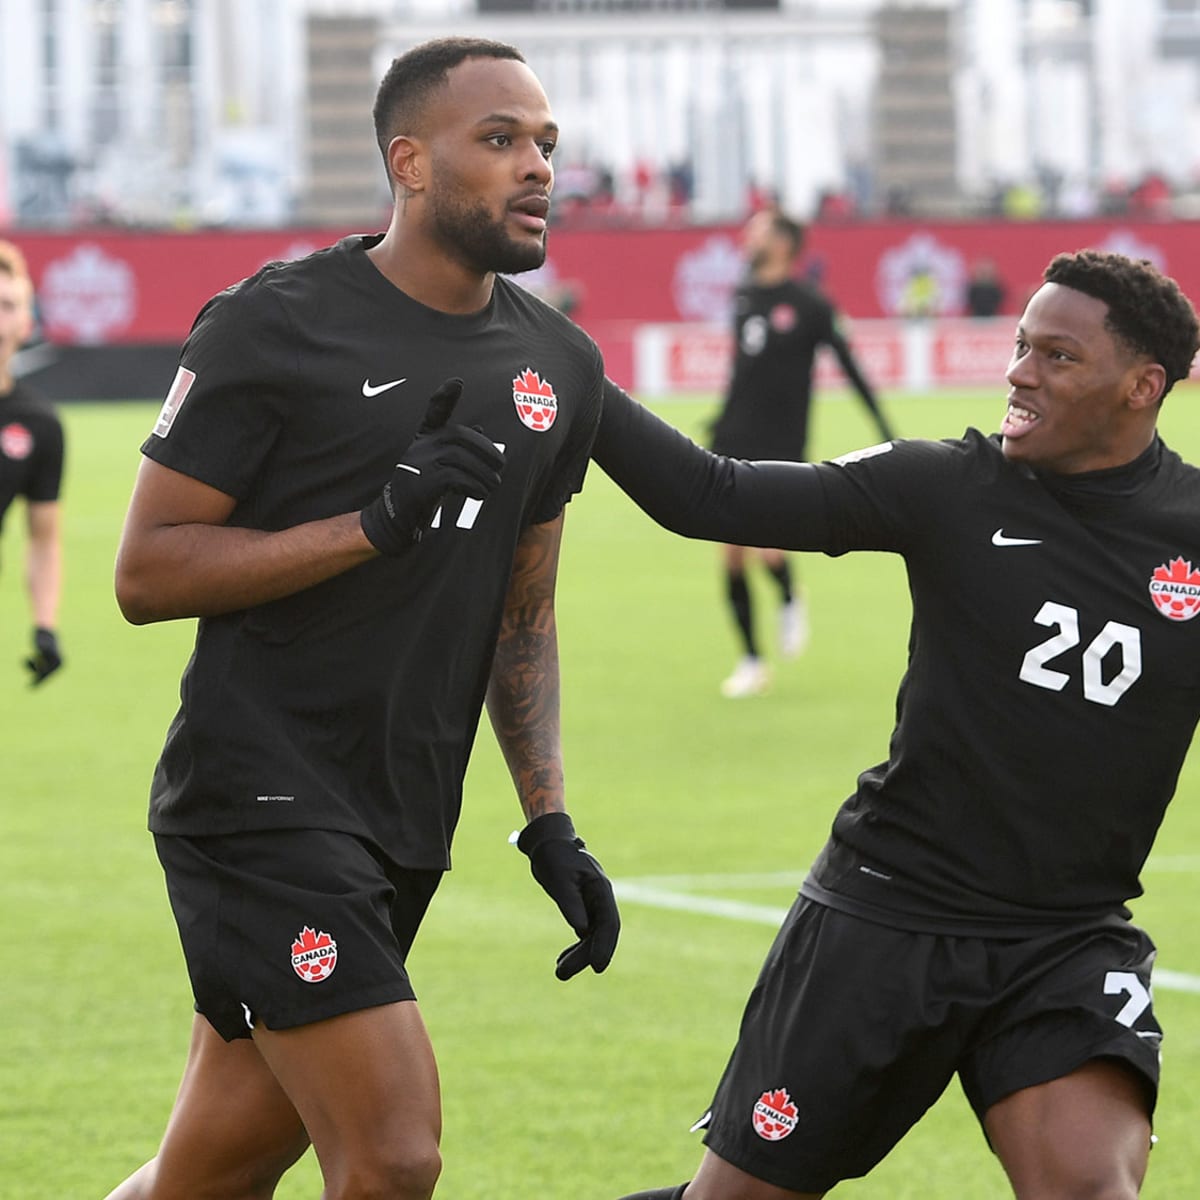 Canada qualifies for World Cup First mens appearance since 1986